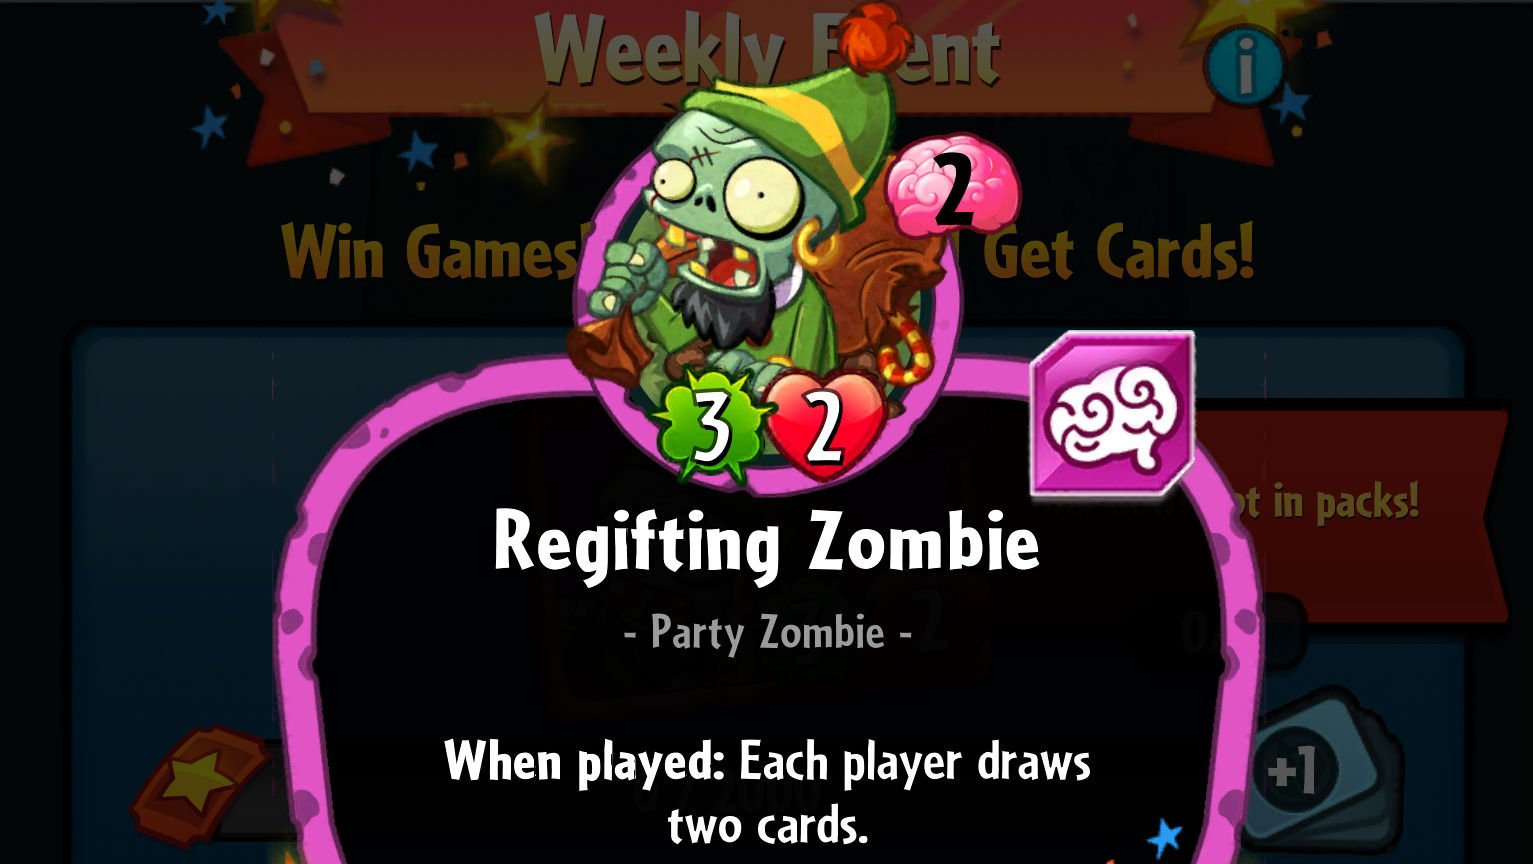 Make Feastivus Plans for Plants vs. Zombies Heroes